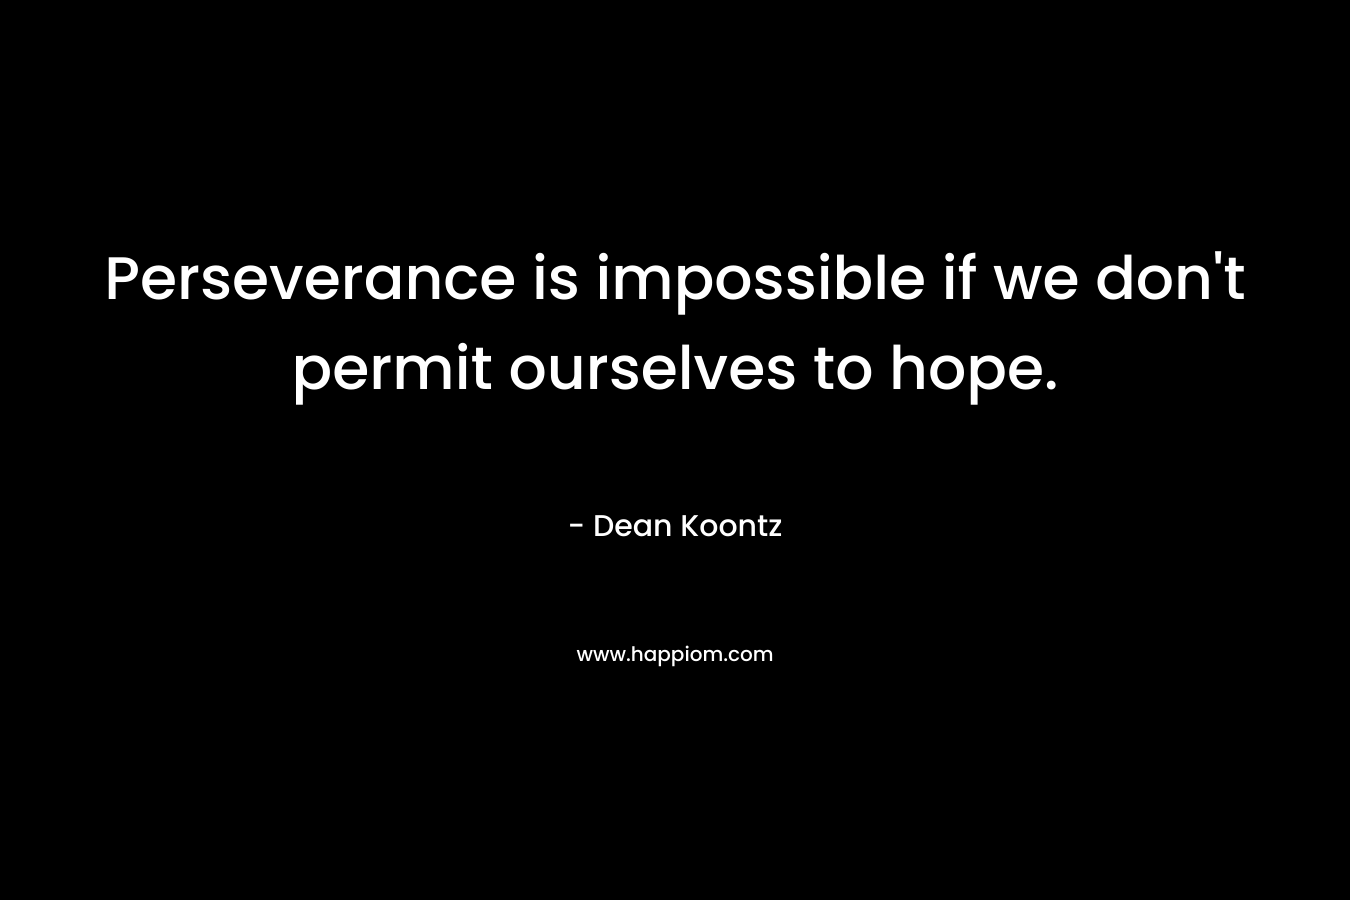 Perseverance is impossible if we don’t permit ourselves to hope. – Dean Koontz